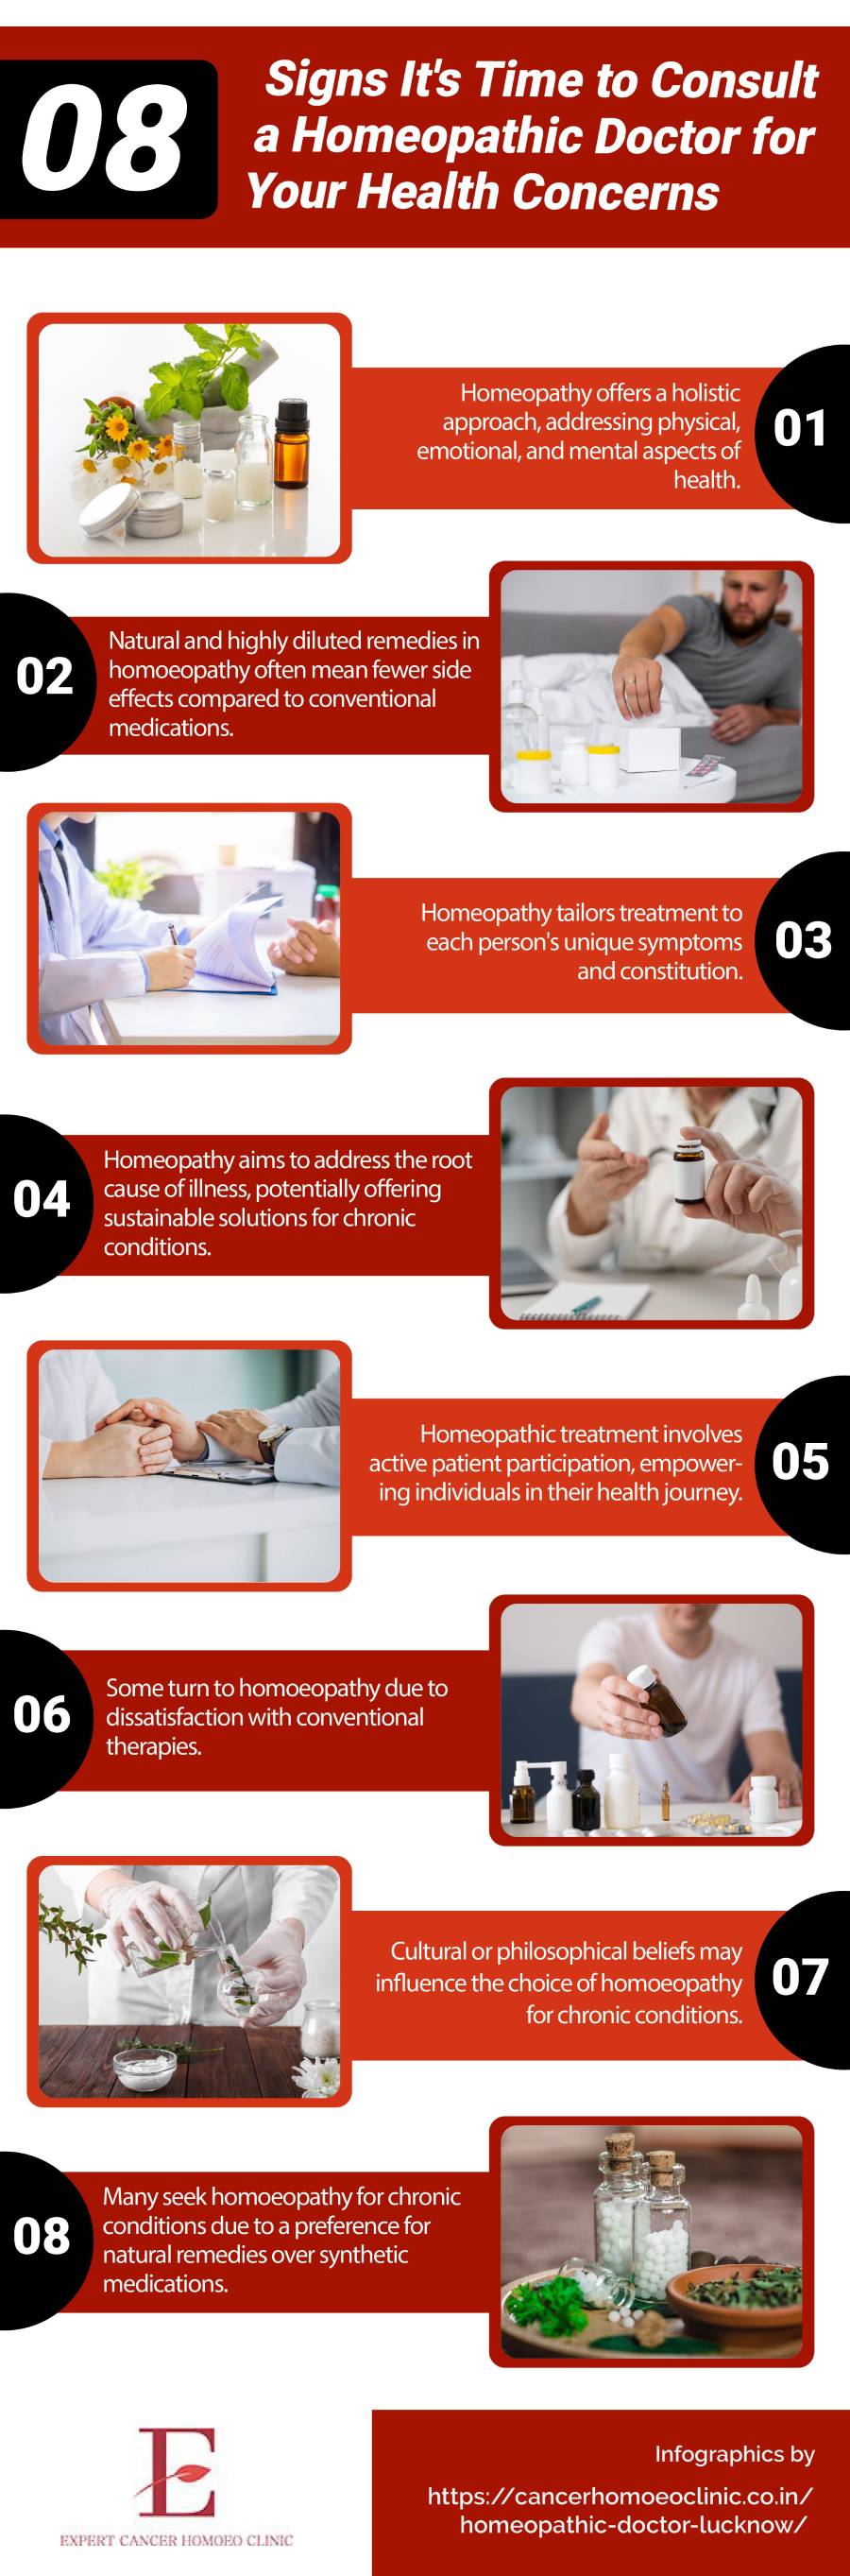 8 Signs It's Time to Consult a Homeopathic Doctor for Your Health Concerns